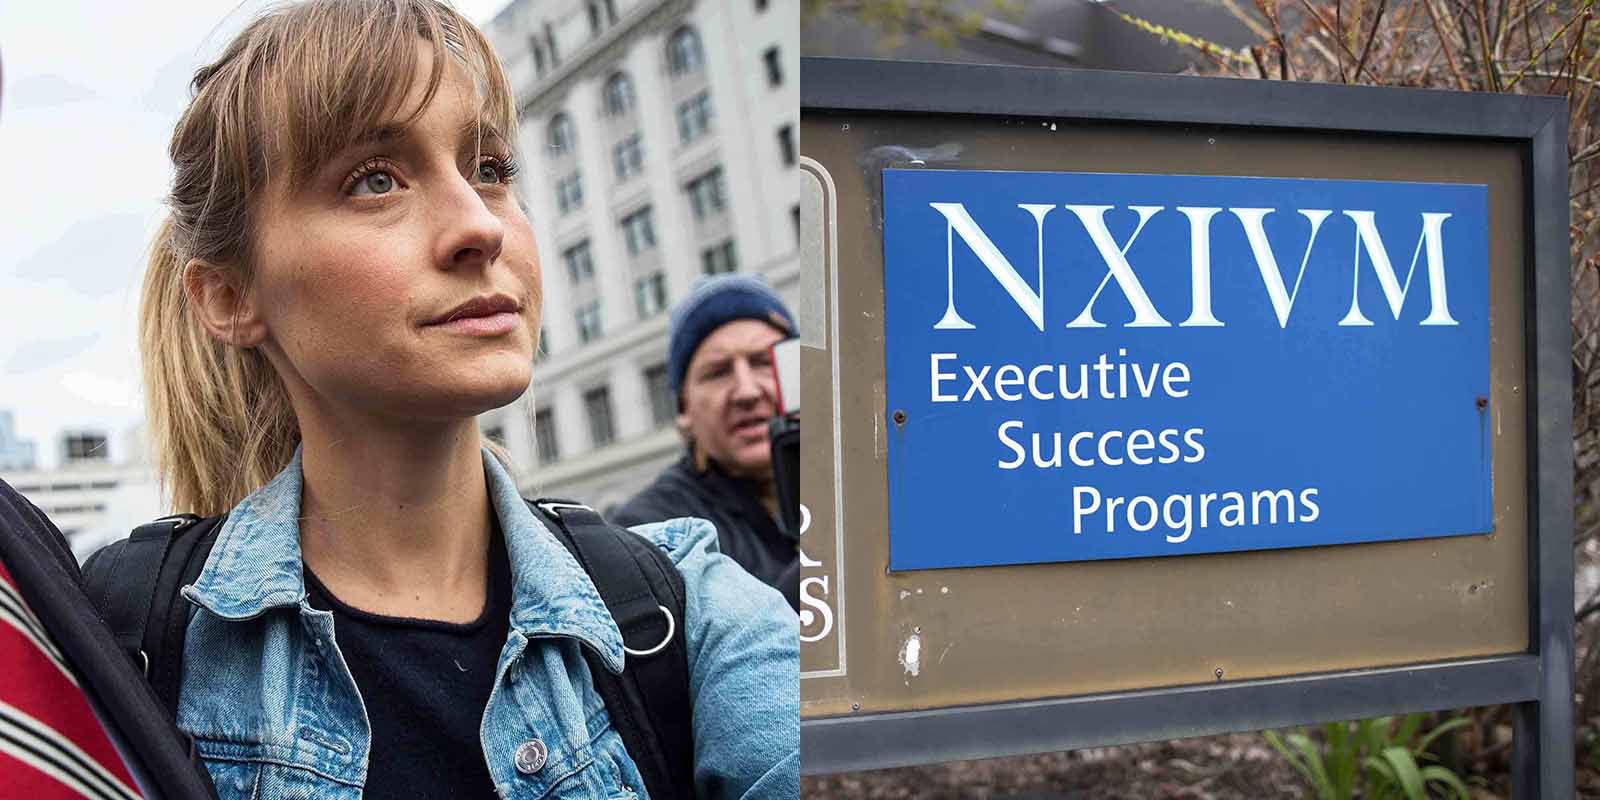 NXIVM has become a hot topic as of late with numerous shows tackling the cult. Learn what you can watch to learn more about NXIVM.